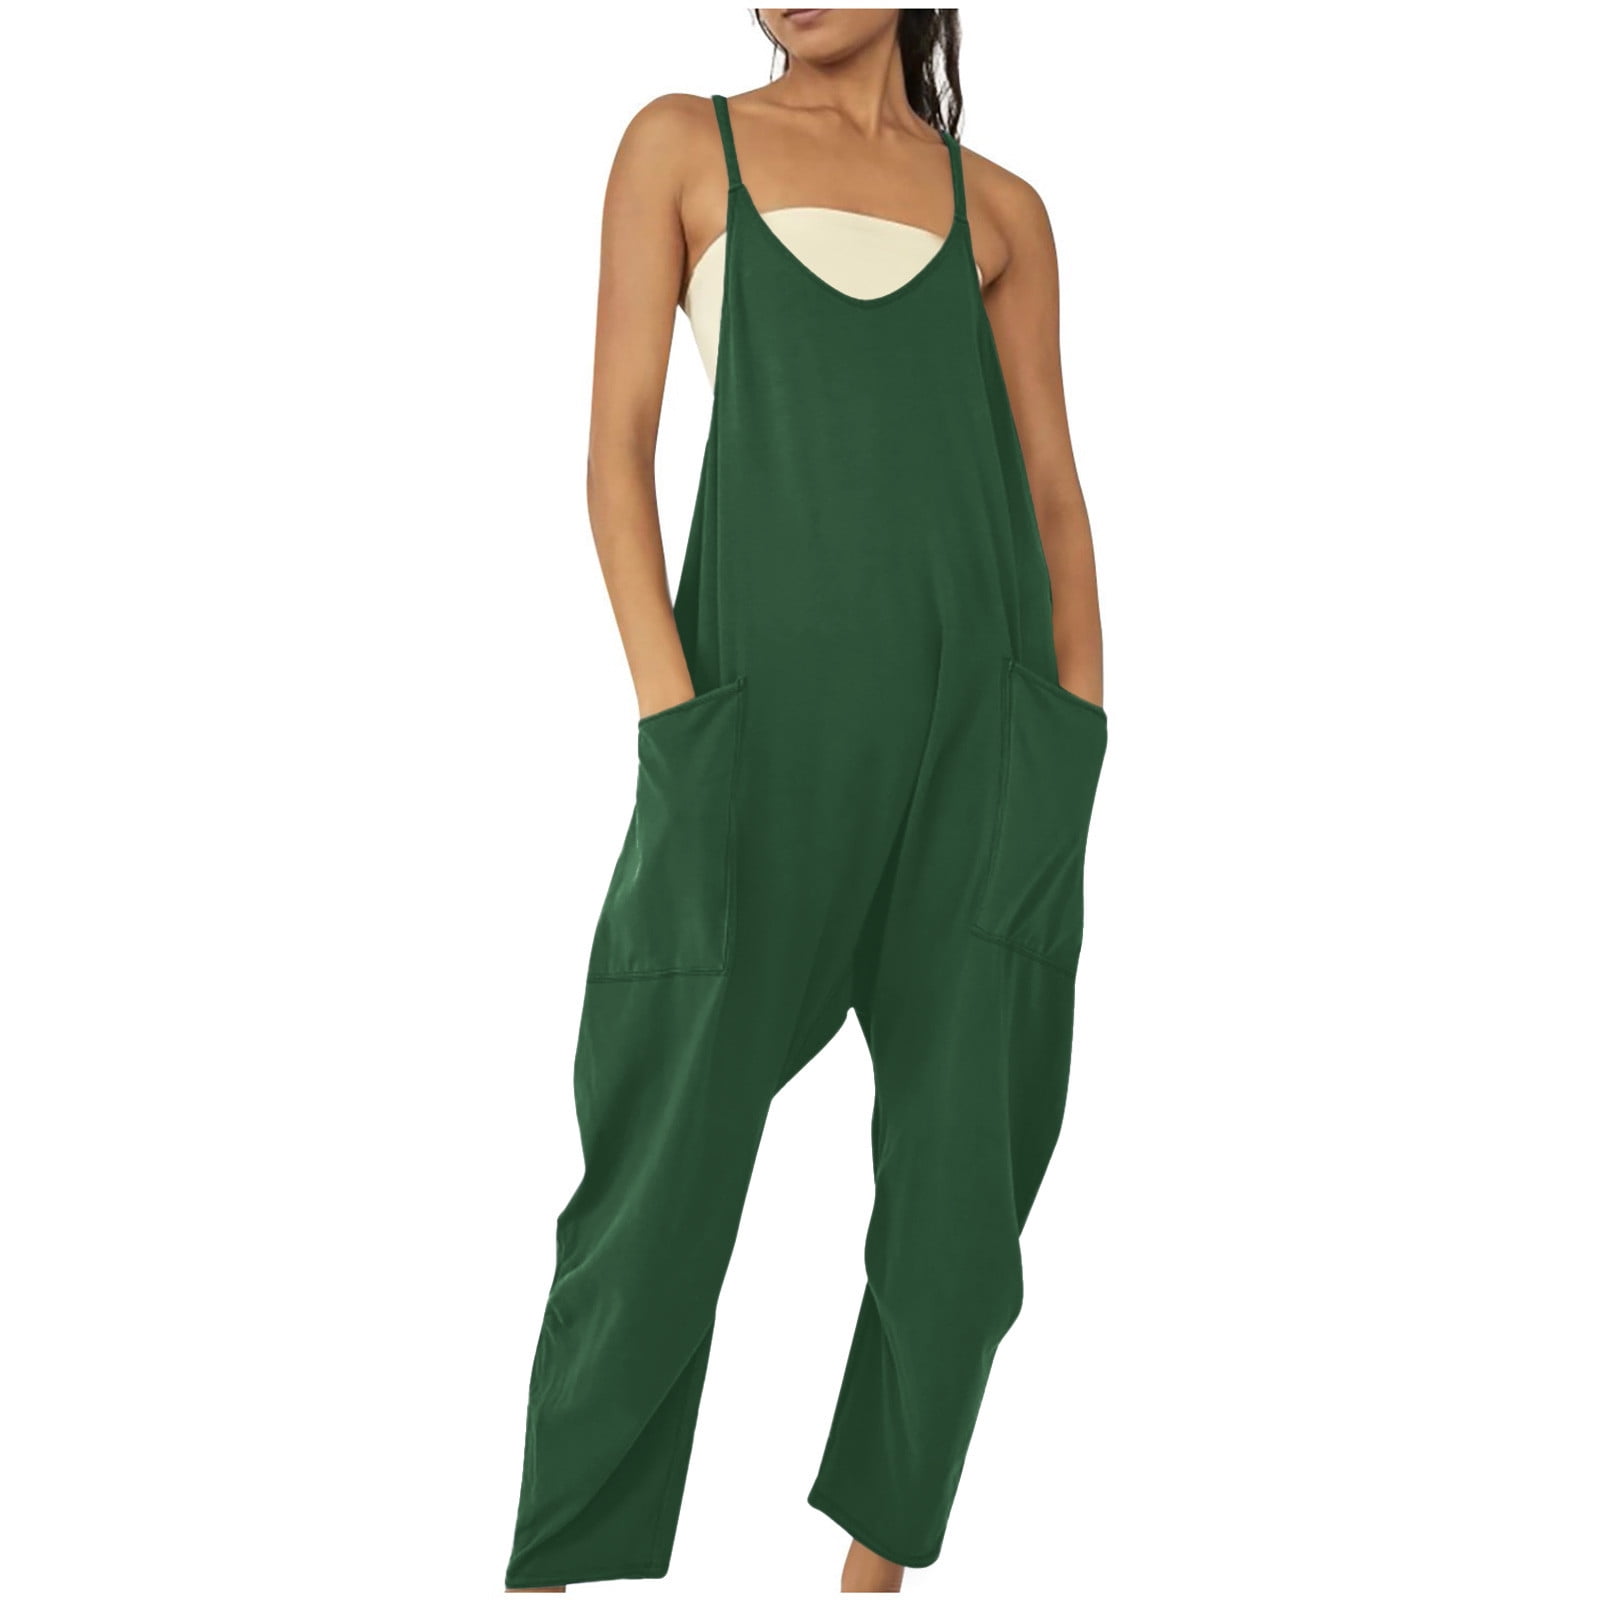 Caracilia Jumpsuits for Women Long Sleeve Zip Up One Piece Casual